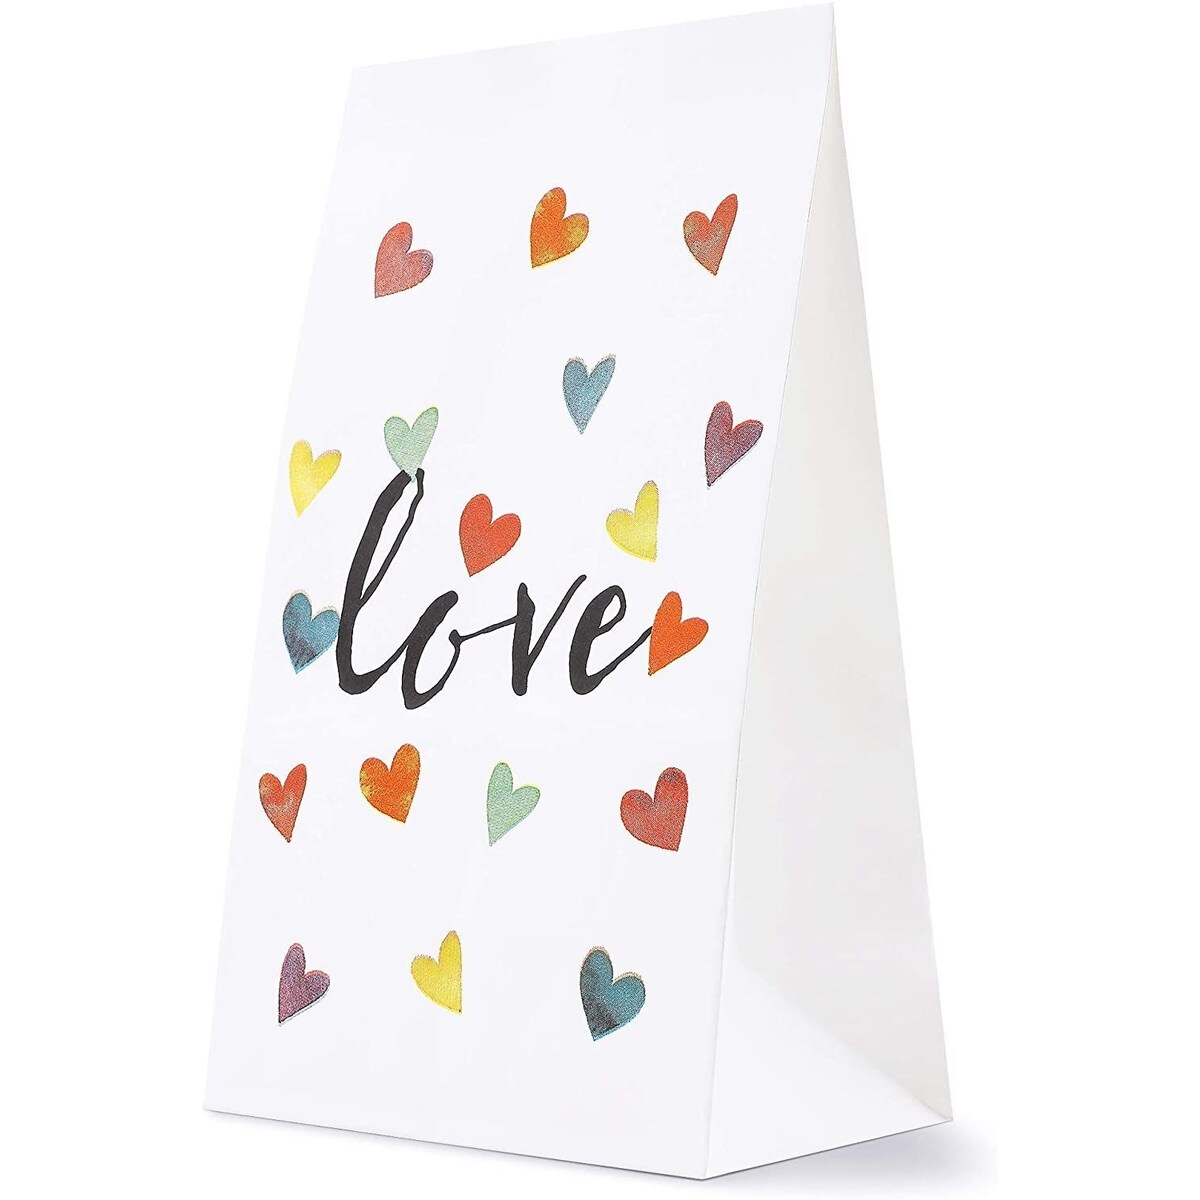 36 Pack Rainbow Heart Valentine Party Favor Bags - Goodie Bags for Treats and Candy, Perfect for Valentine&#x27;s Day Classroom Parties, Kids, Coworkers